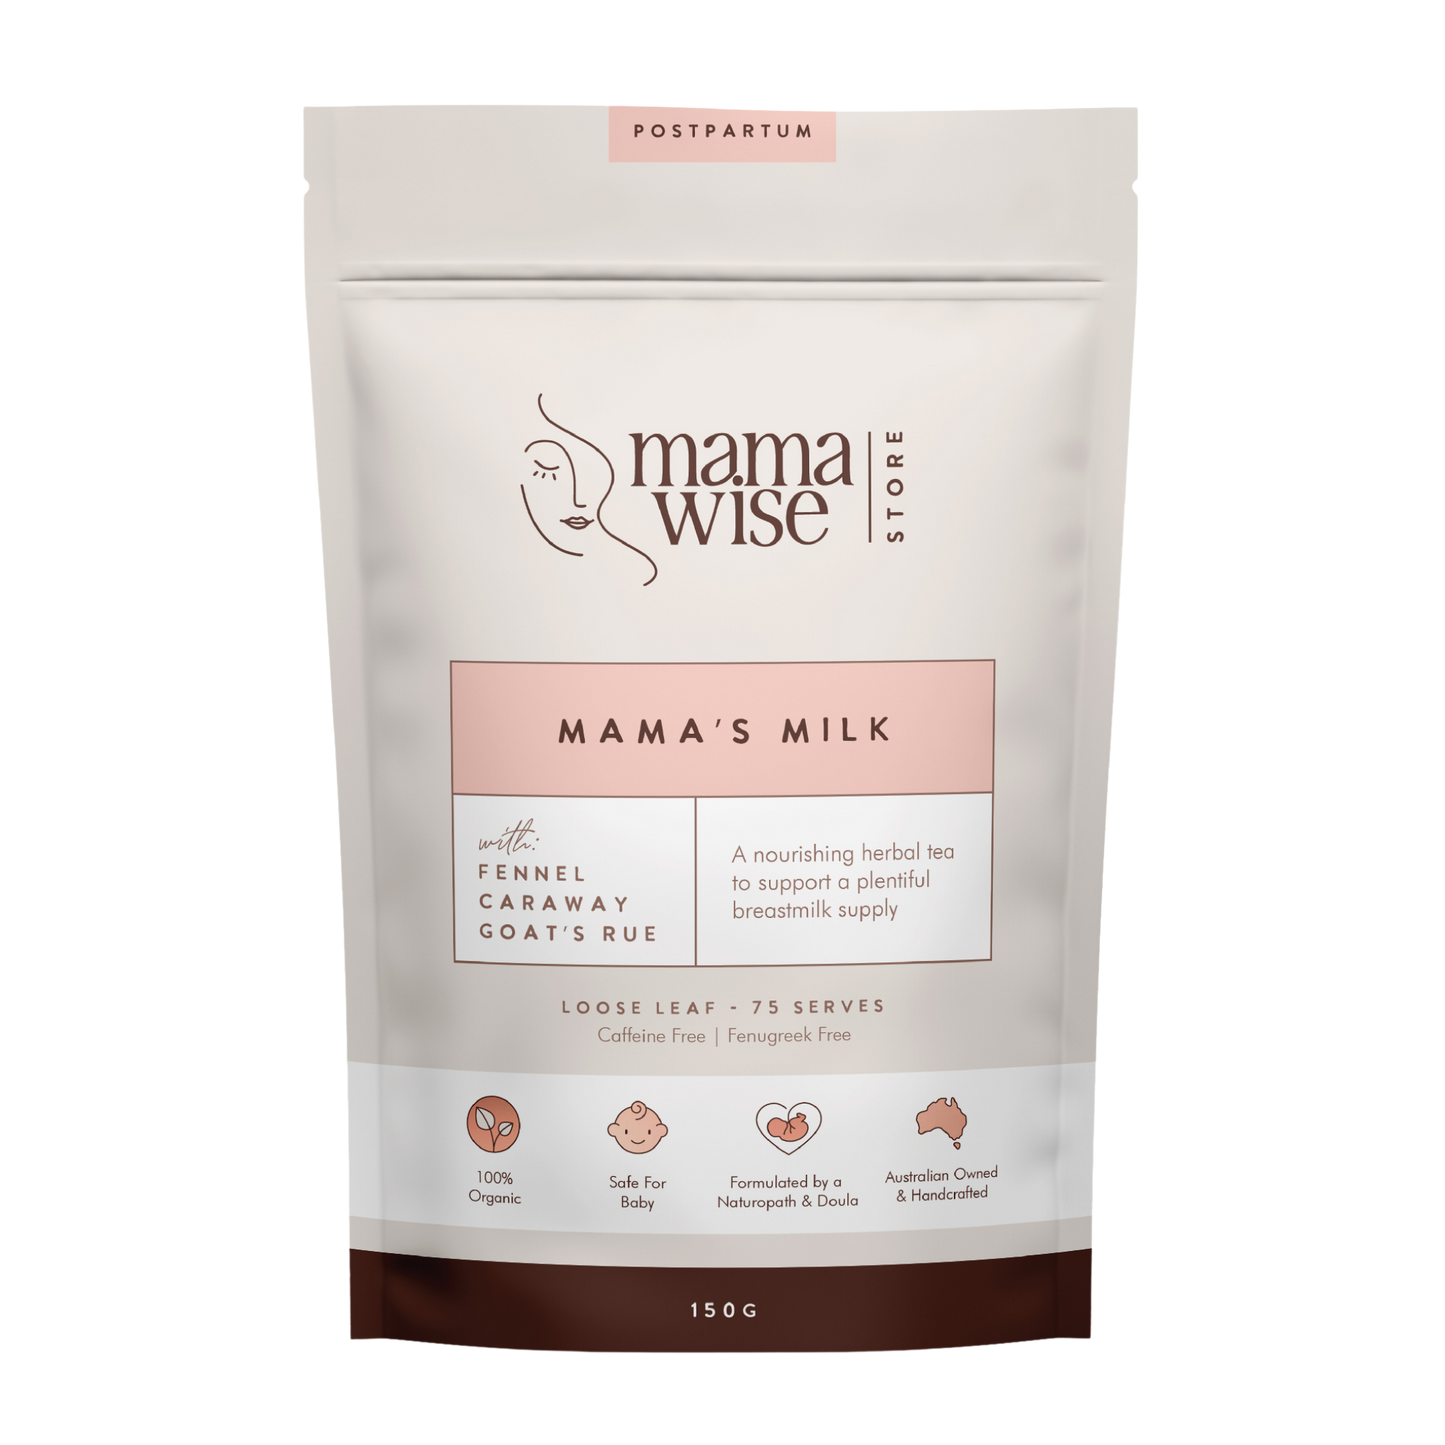 Mamawise Mama's Milk Herbal Tea 150gm pack for breastfeeding mothers to support healthy milk supply